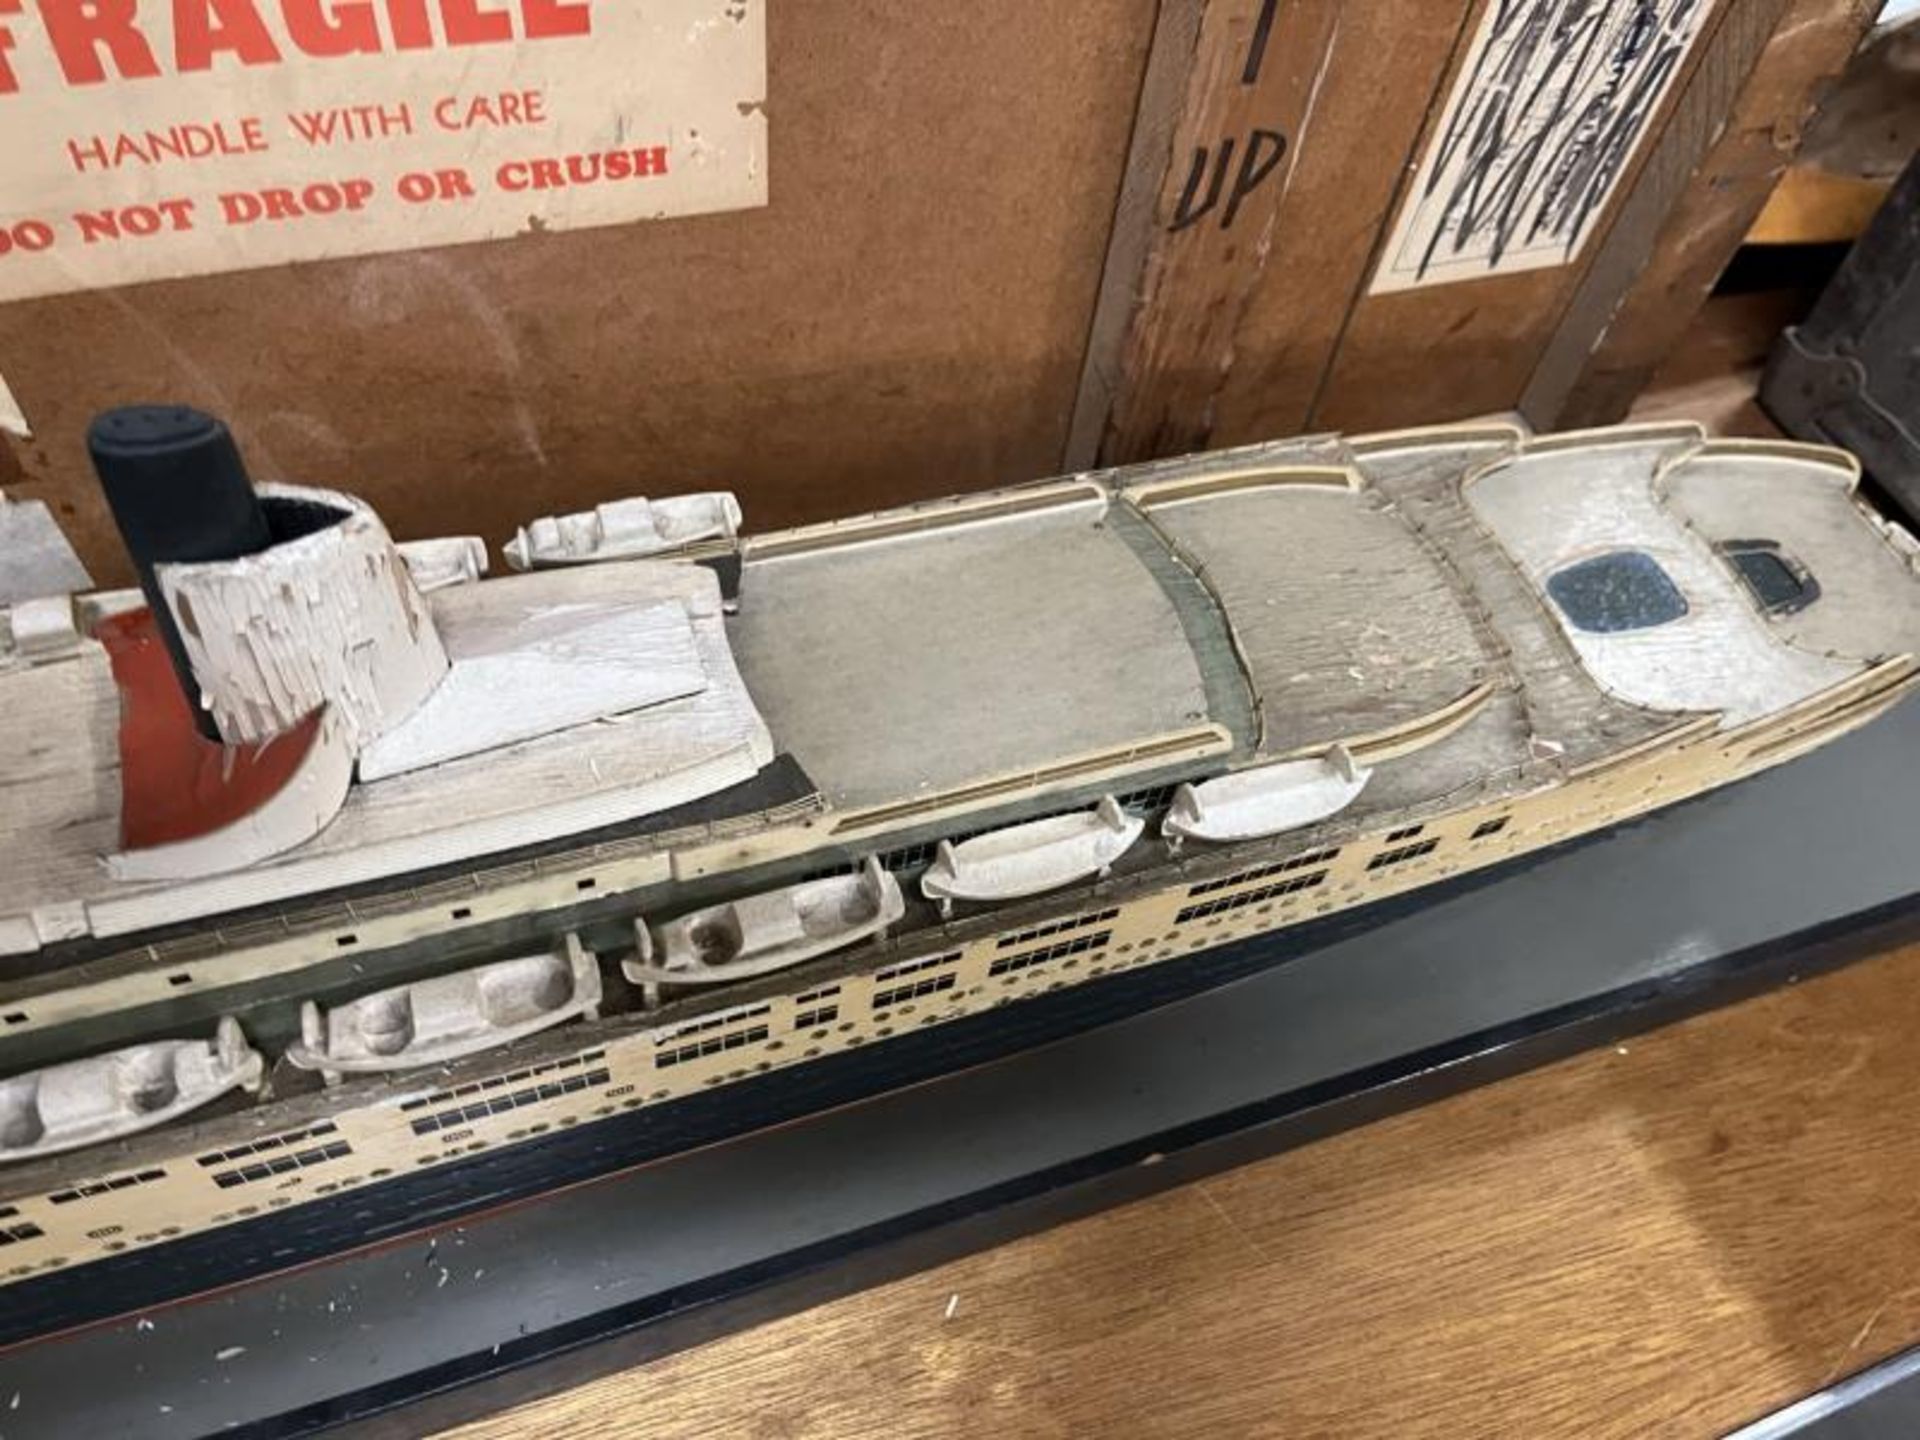 Queen Elizabeth 2 Ship Model with Original Shipping Crate, Missing (6) Life Boats, Paint Loss on - Image 6 of 14